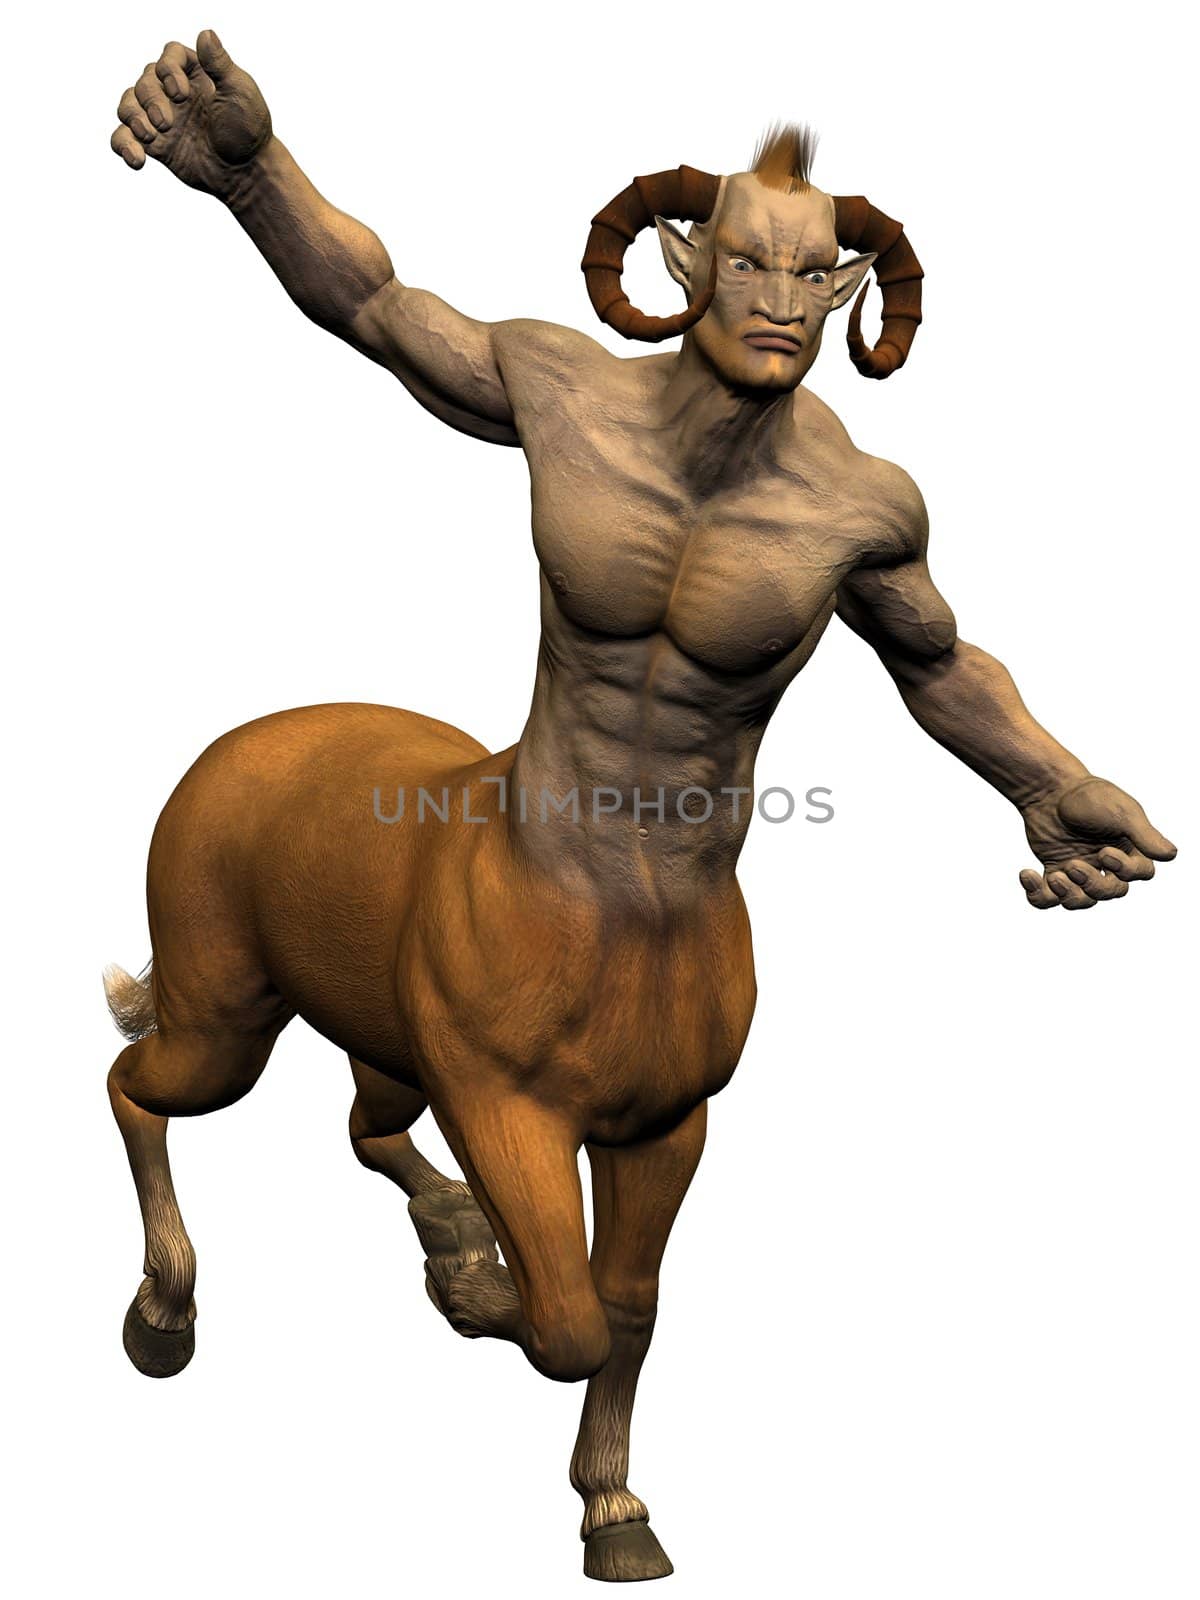 3D rendered image of centaur on white background isolated